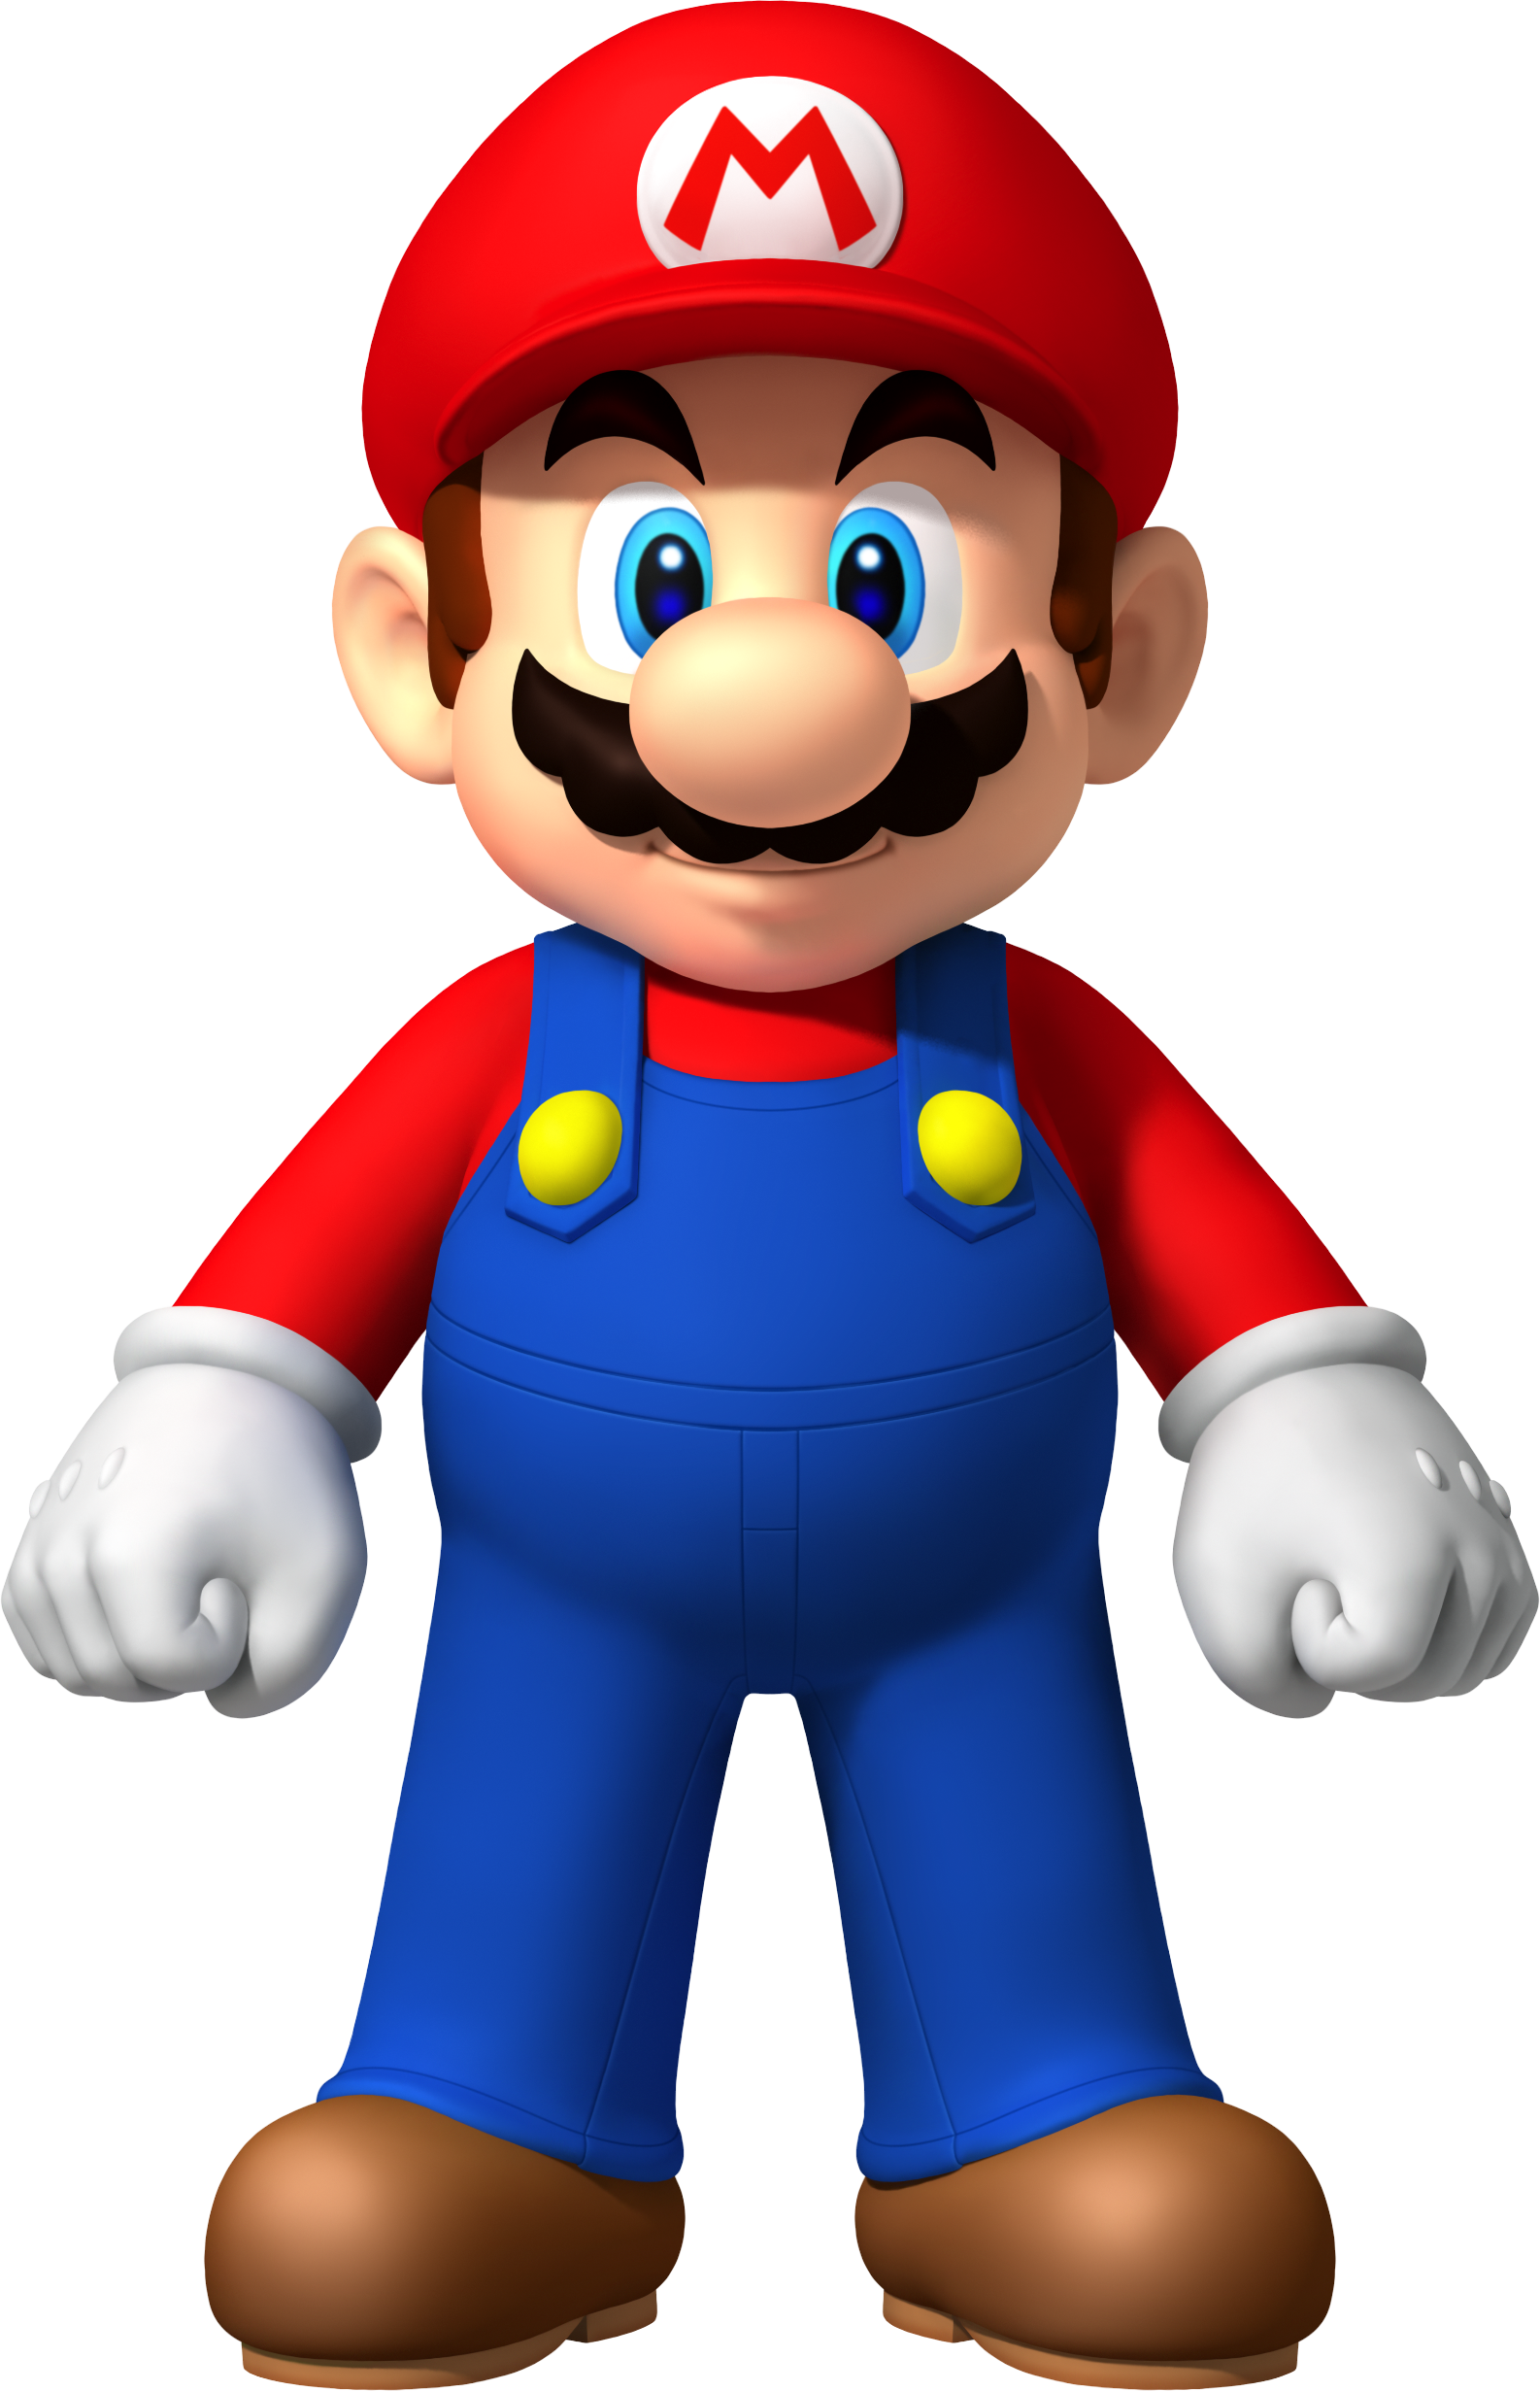 Standing Mario Super Bros Boy HQ Image Free PNG PNG Image